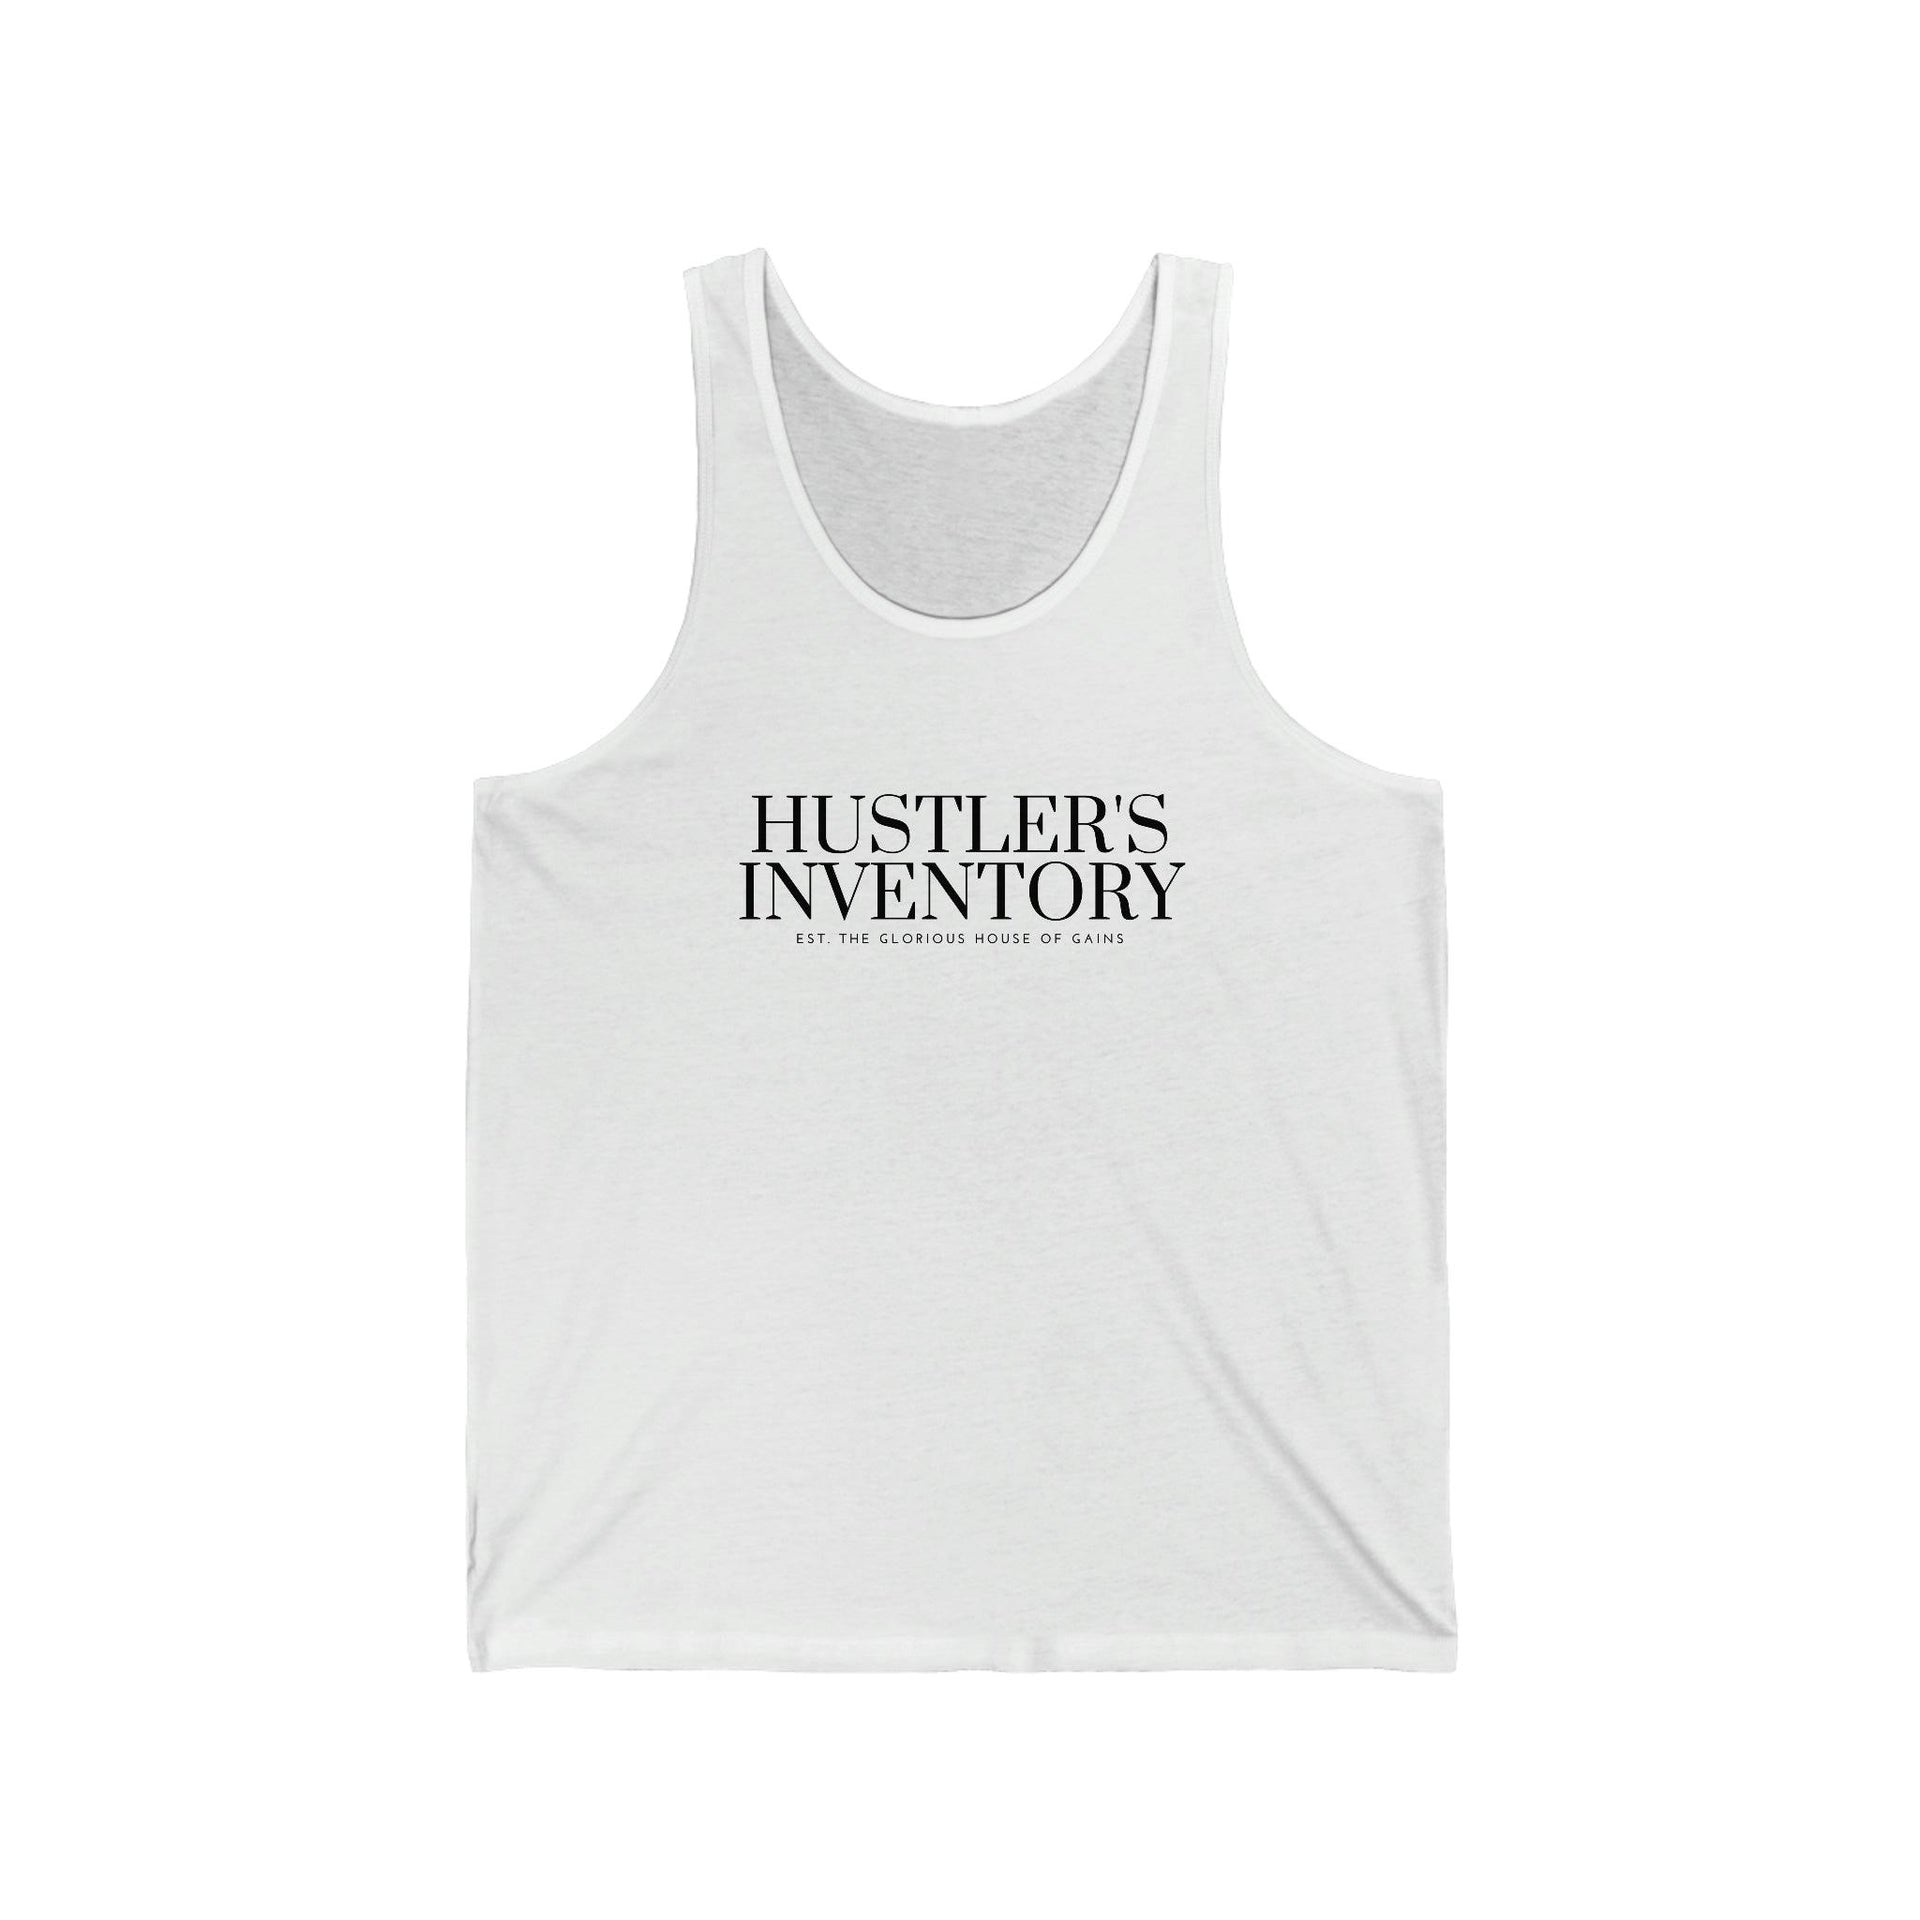 TankTop White Front Hustler' s Inventory Fitness Clothing